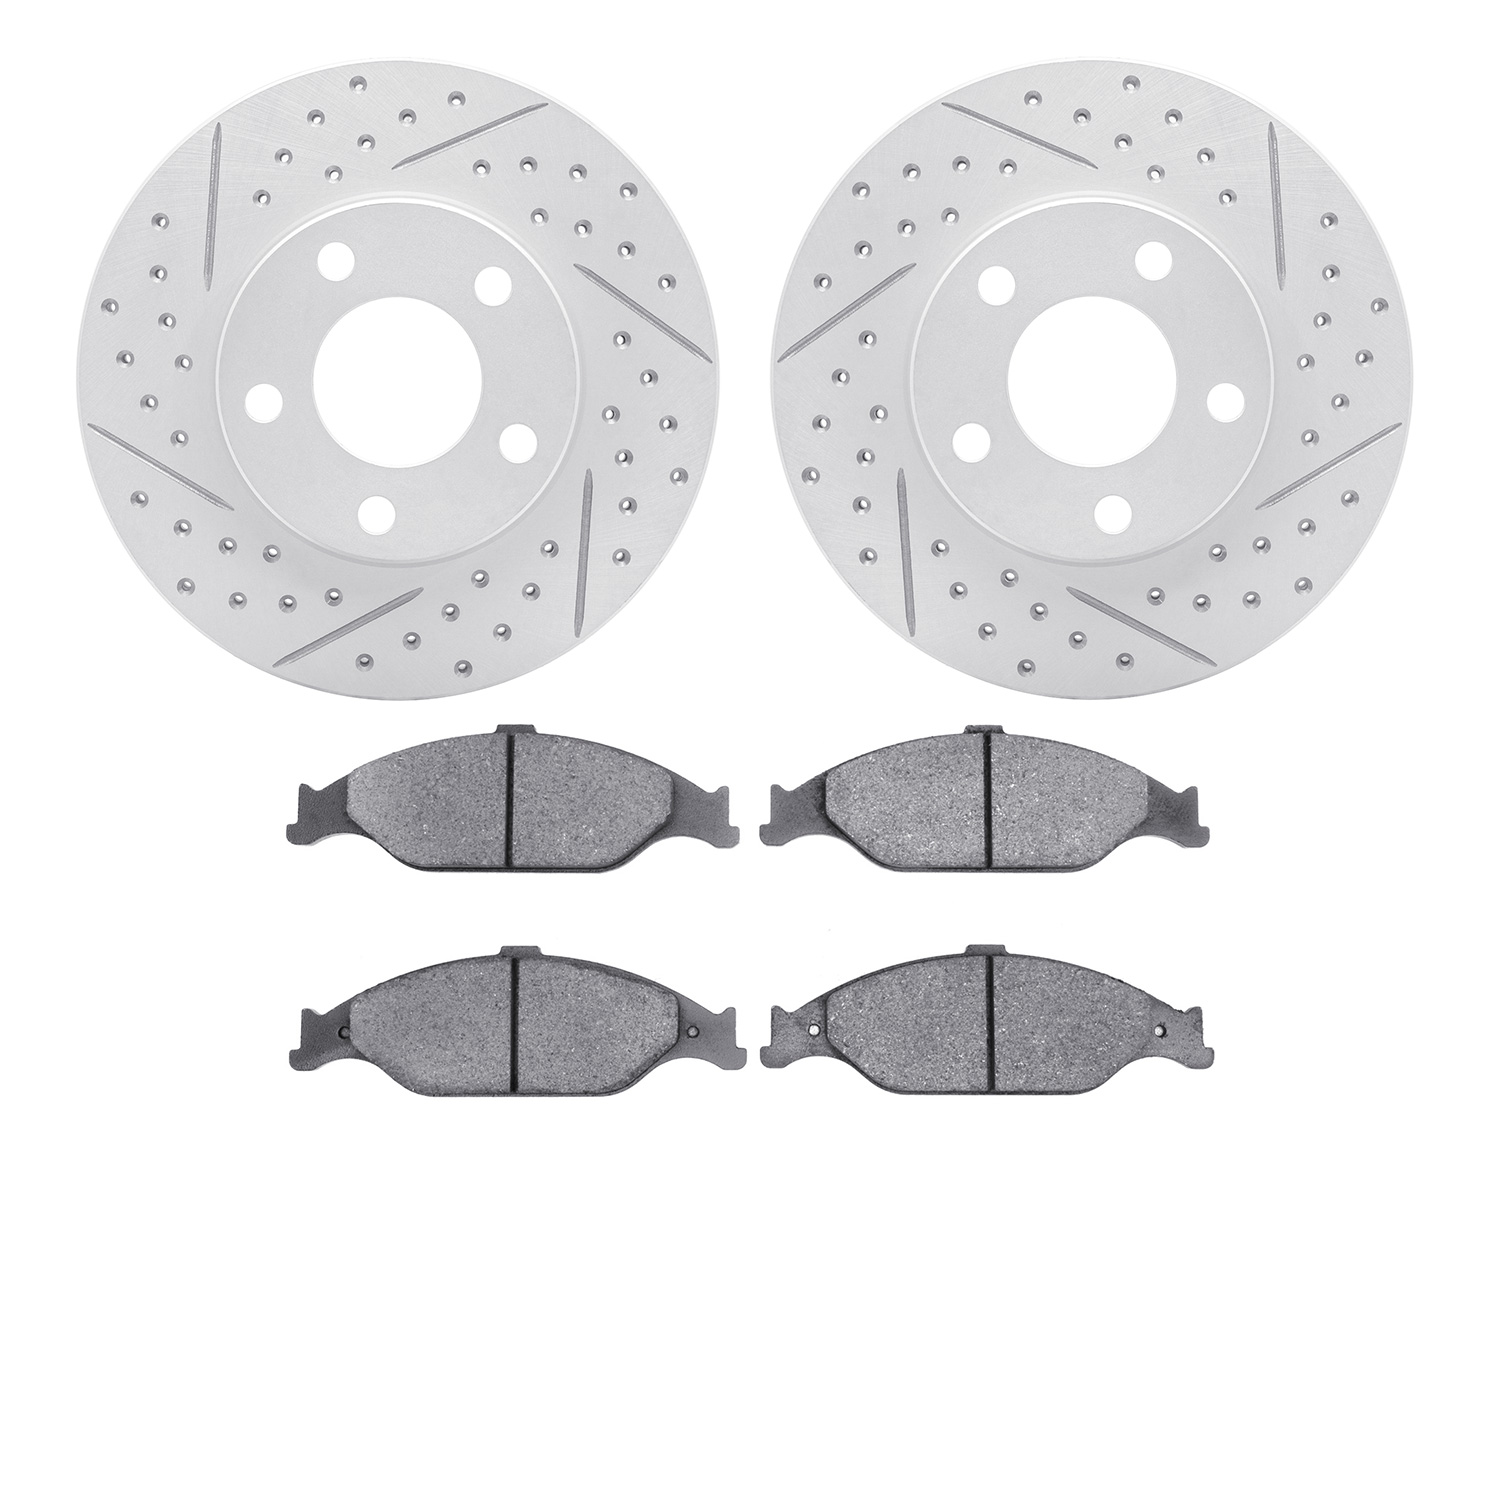 2502-54012 Geoperformance Drilled/Slotted Rotors w/5000 Advanced Brake Pads Kit, 1999-2004 Ford/Lincoln/Mercury/Mazda, Position: